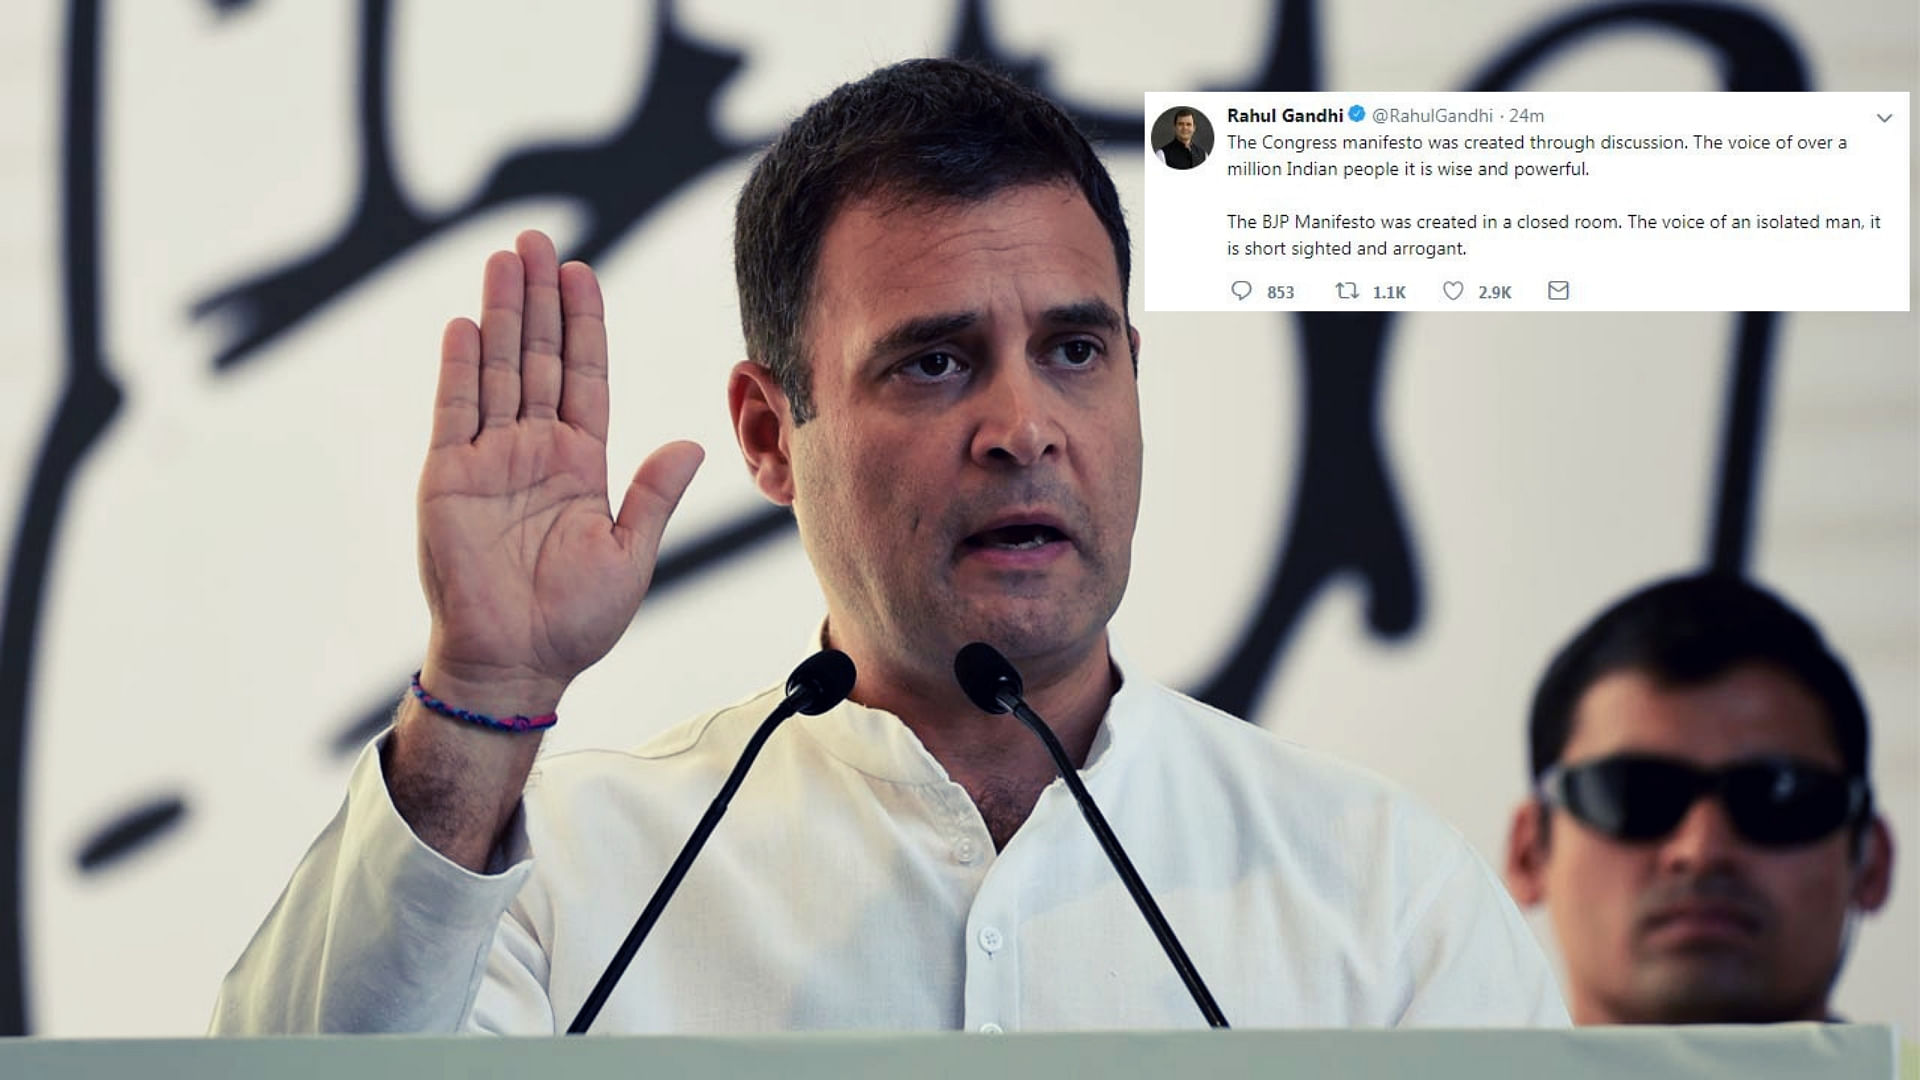 Congress President Rahul Gandhi tweeted that the BJP’s manifesto for the Lok Sabha polls was “arrogant and short sighted”.